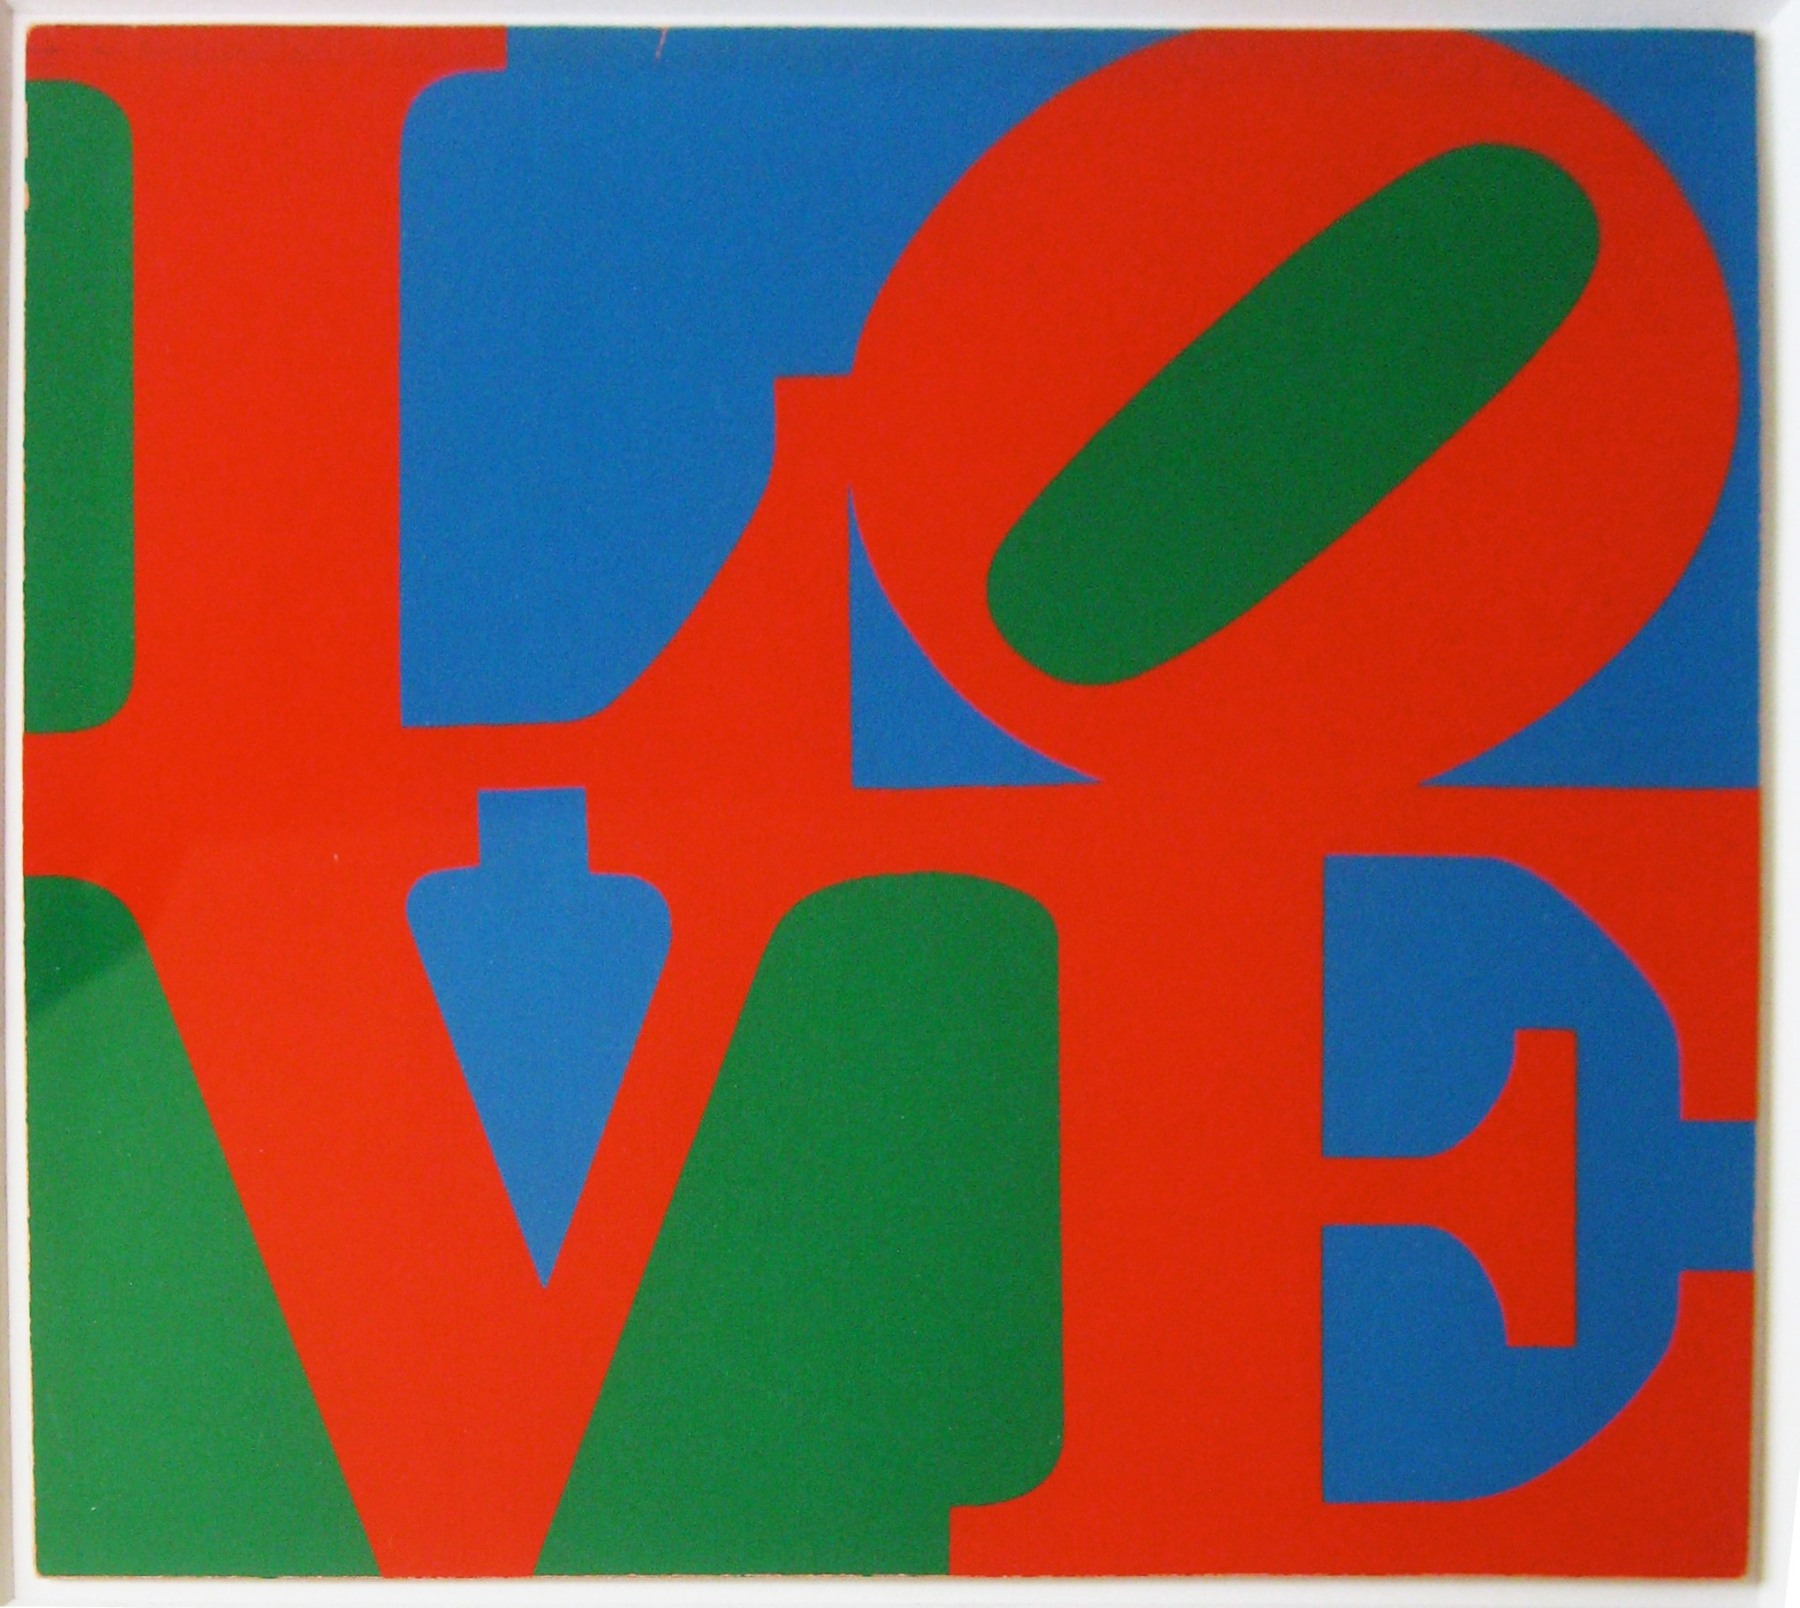 ROBERT INDIANA. &quot;Love&quot; (MoMA). 1965. Image courtesy of Alden Projects&trade;, New York.